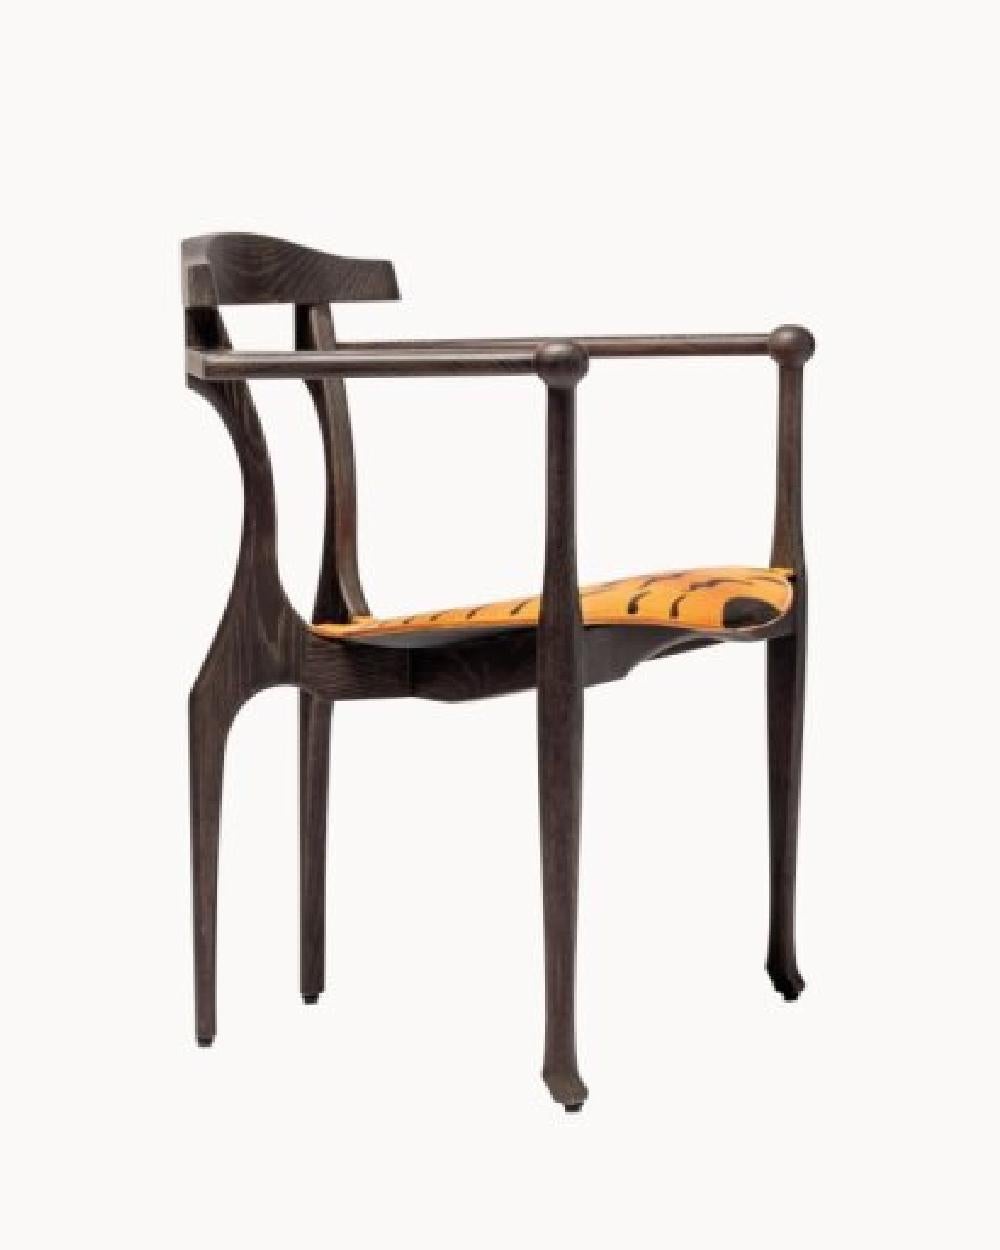 The Tiger Art Gaulino reimagines an icon from BD.
The Gaulino chair is an iconic work from the mind of Oscar Tusquets. The limitededition Tiger Art Gaulino joins the Gaulino Easy structure with a hand-painted seat by Tusquets. It was created to